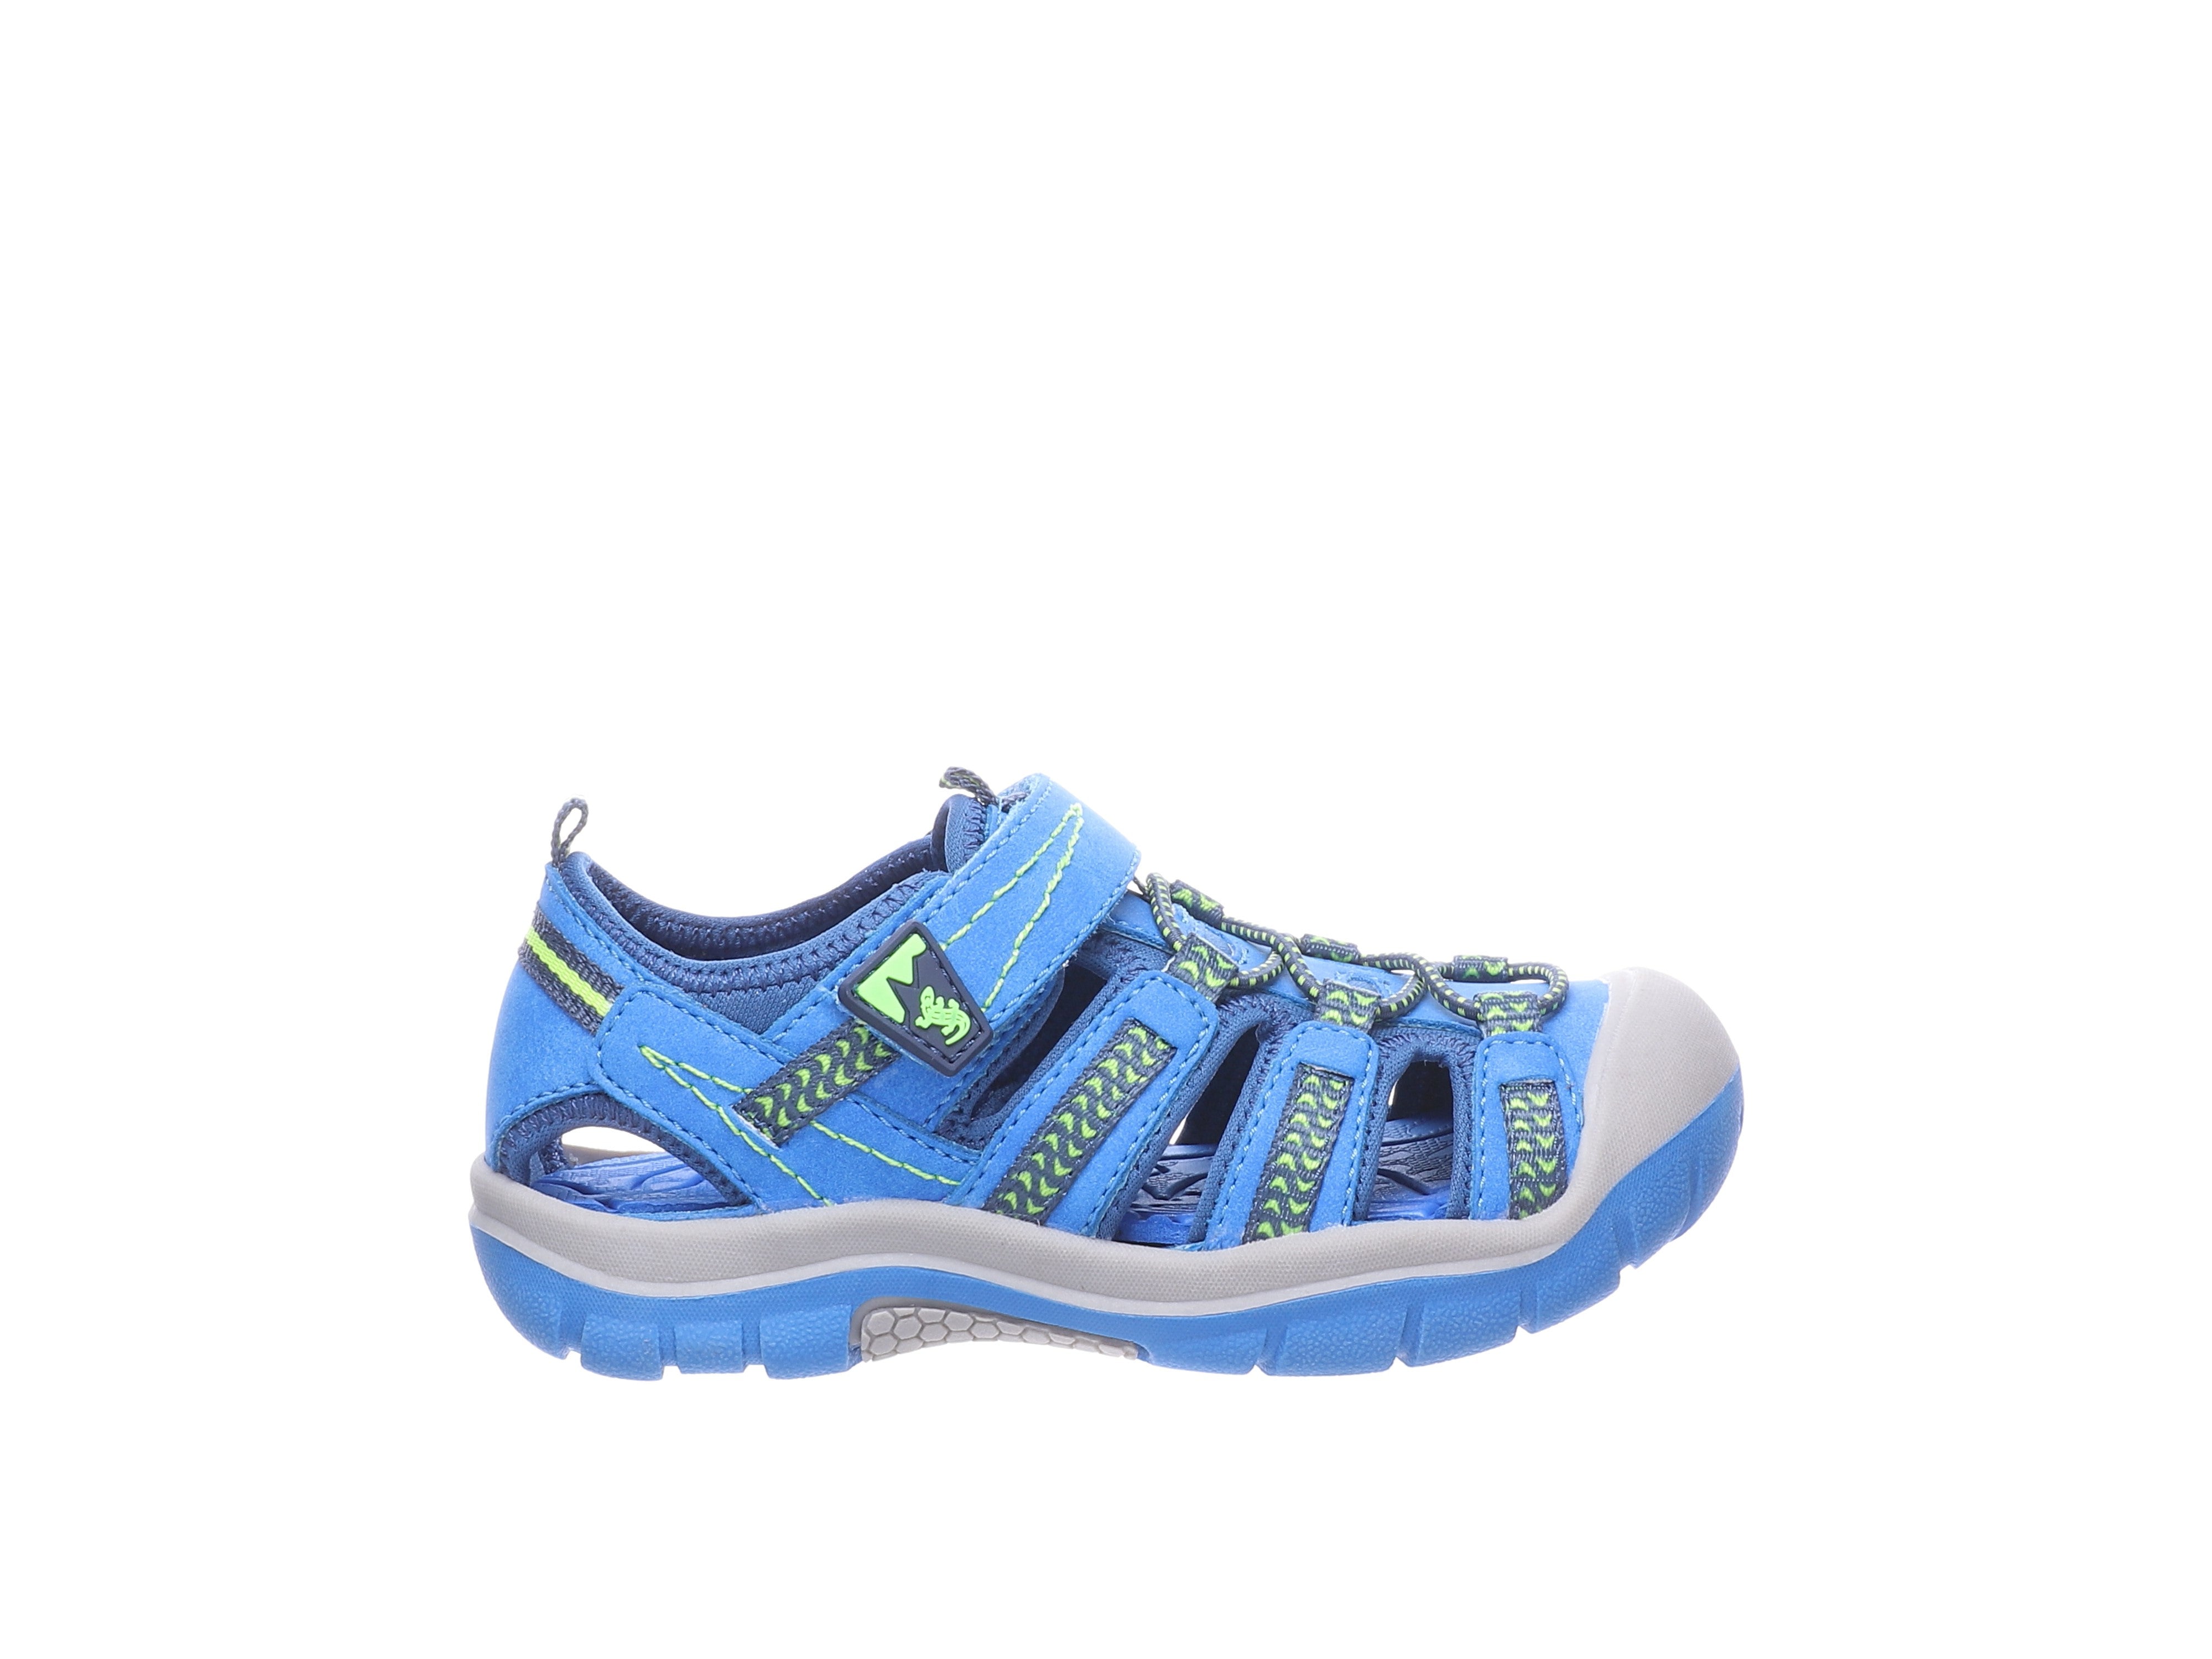 Chicas 33/21610/32 & Chicos SANDALS - BOYS - COBALT/NAVY/LIME - CLOSED – Shoes TOE LURCHI PETE